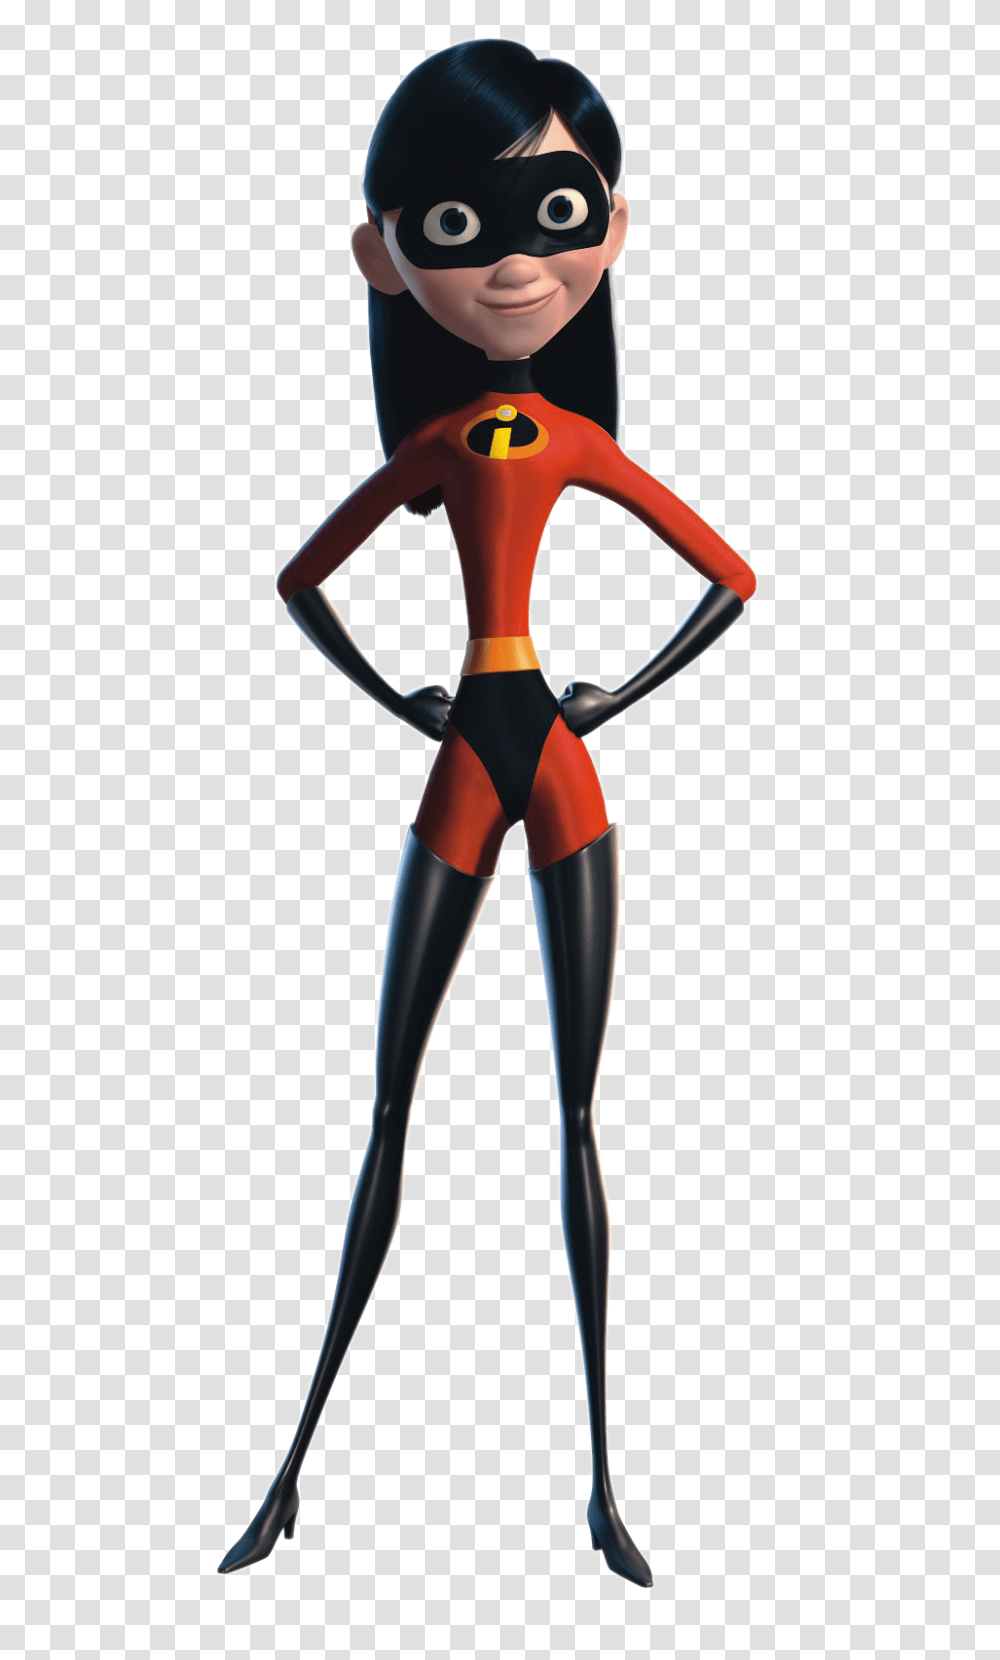 The Incredibles Images Free Download, Label, Sticker Transparent Png